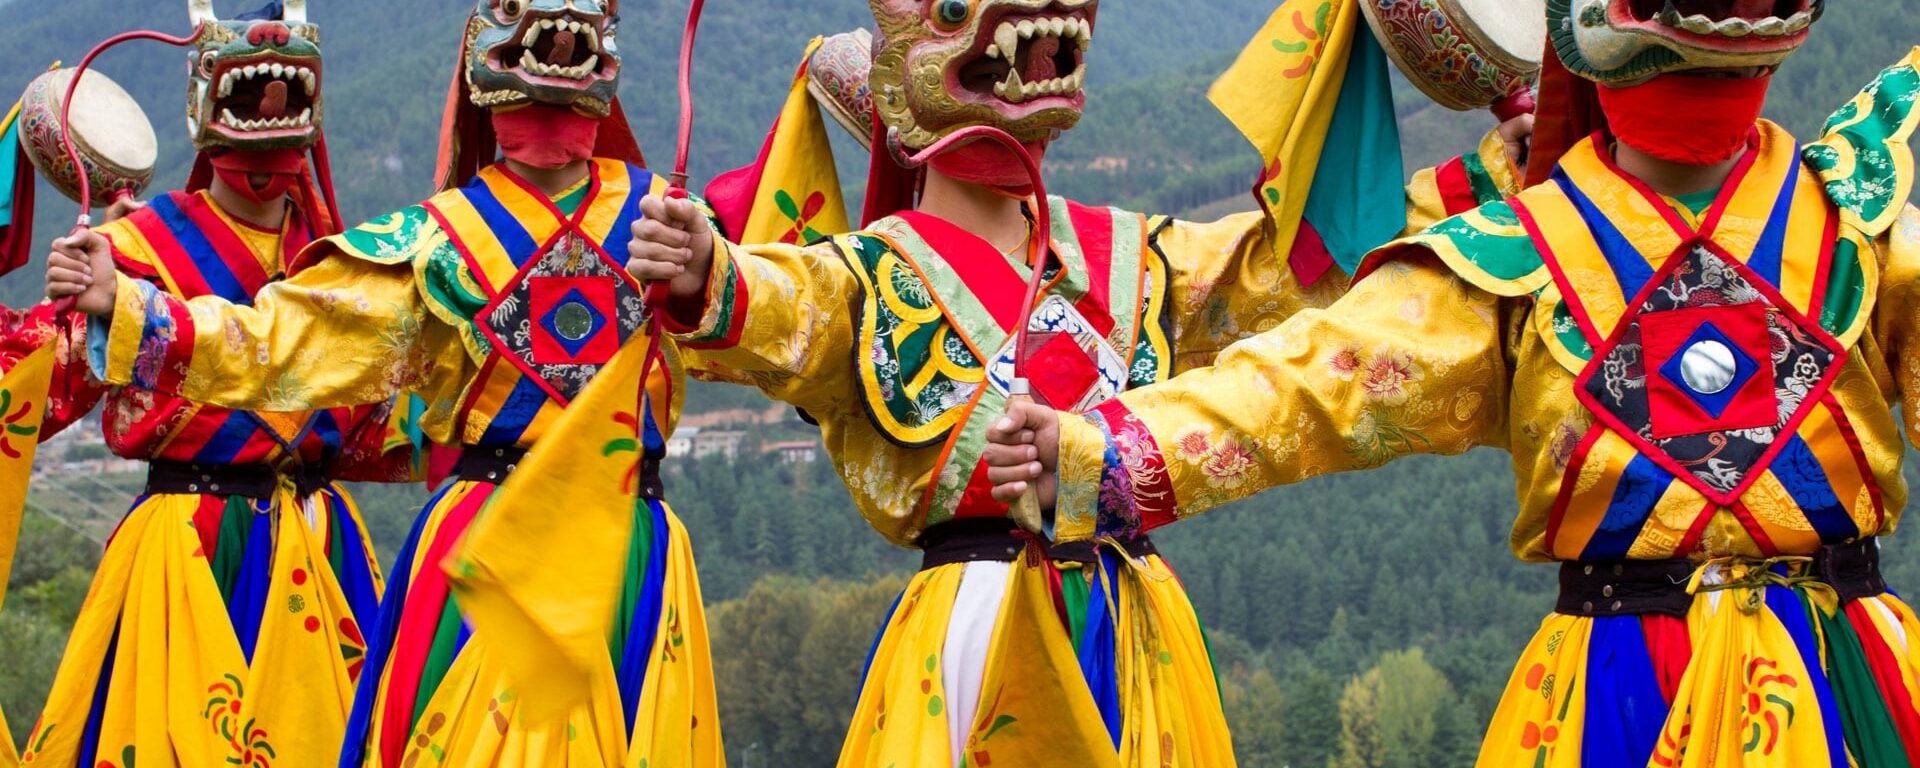 Bhutan known for breathtaking natural beauty, embellished decorative architecture and a deeply entrenched culture